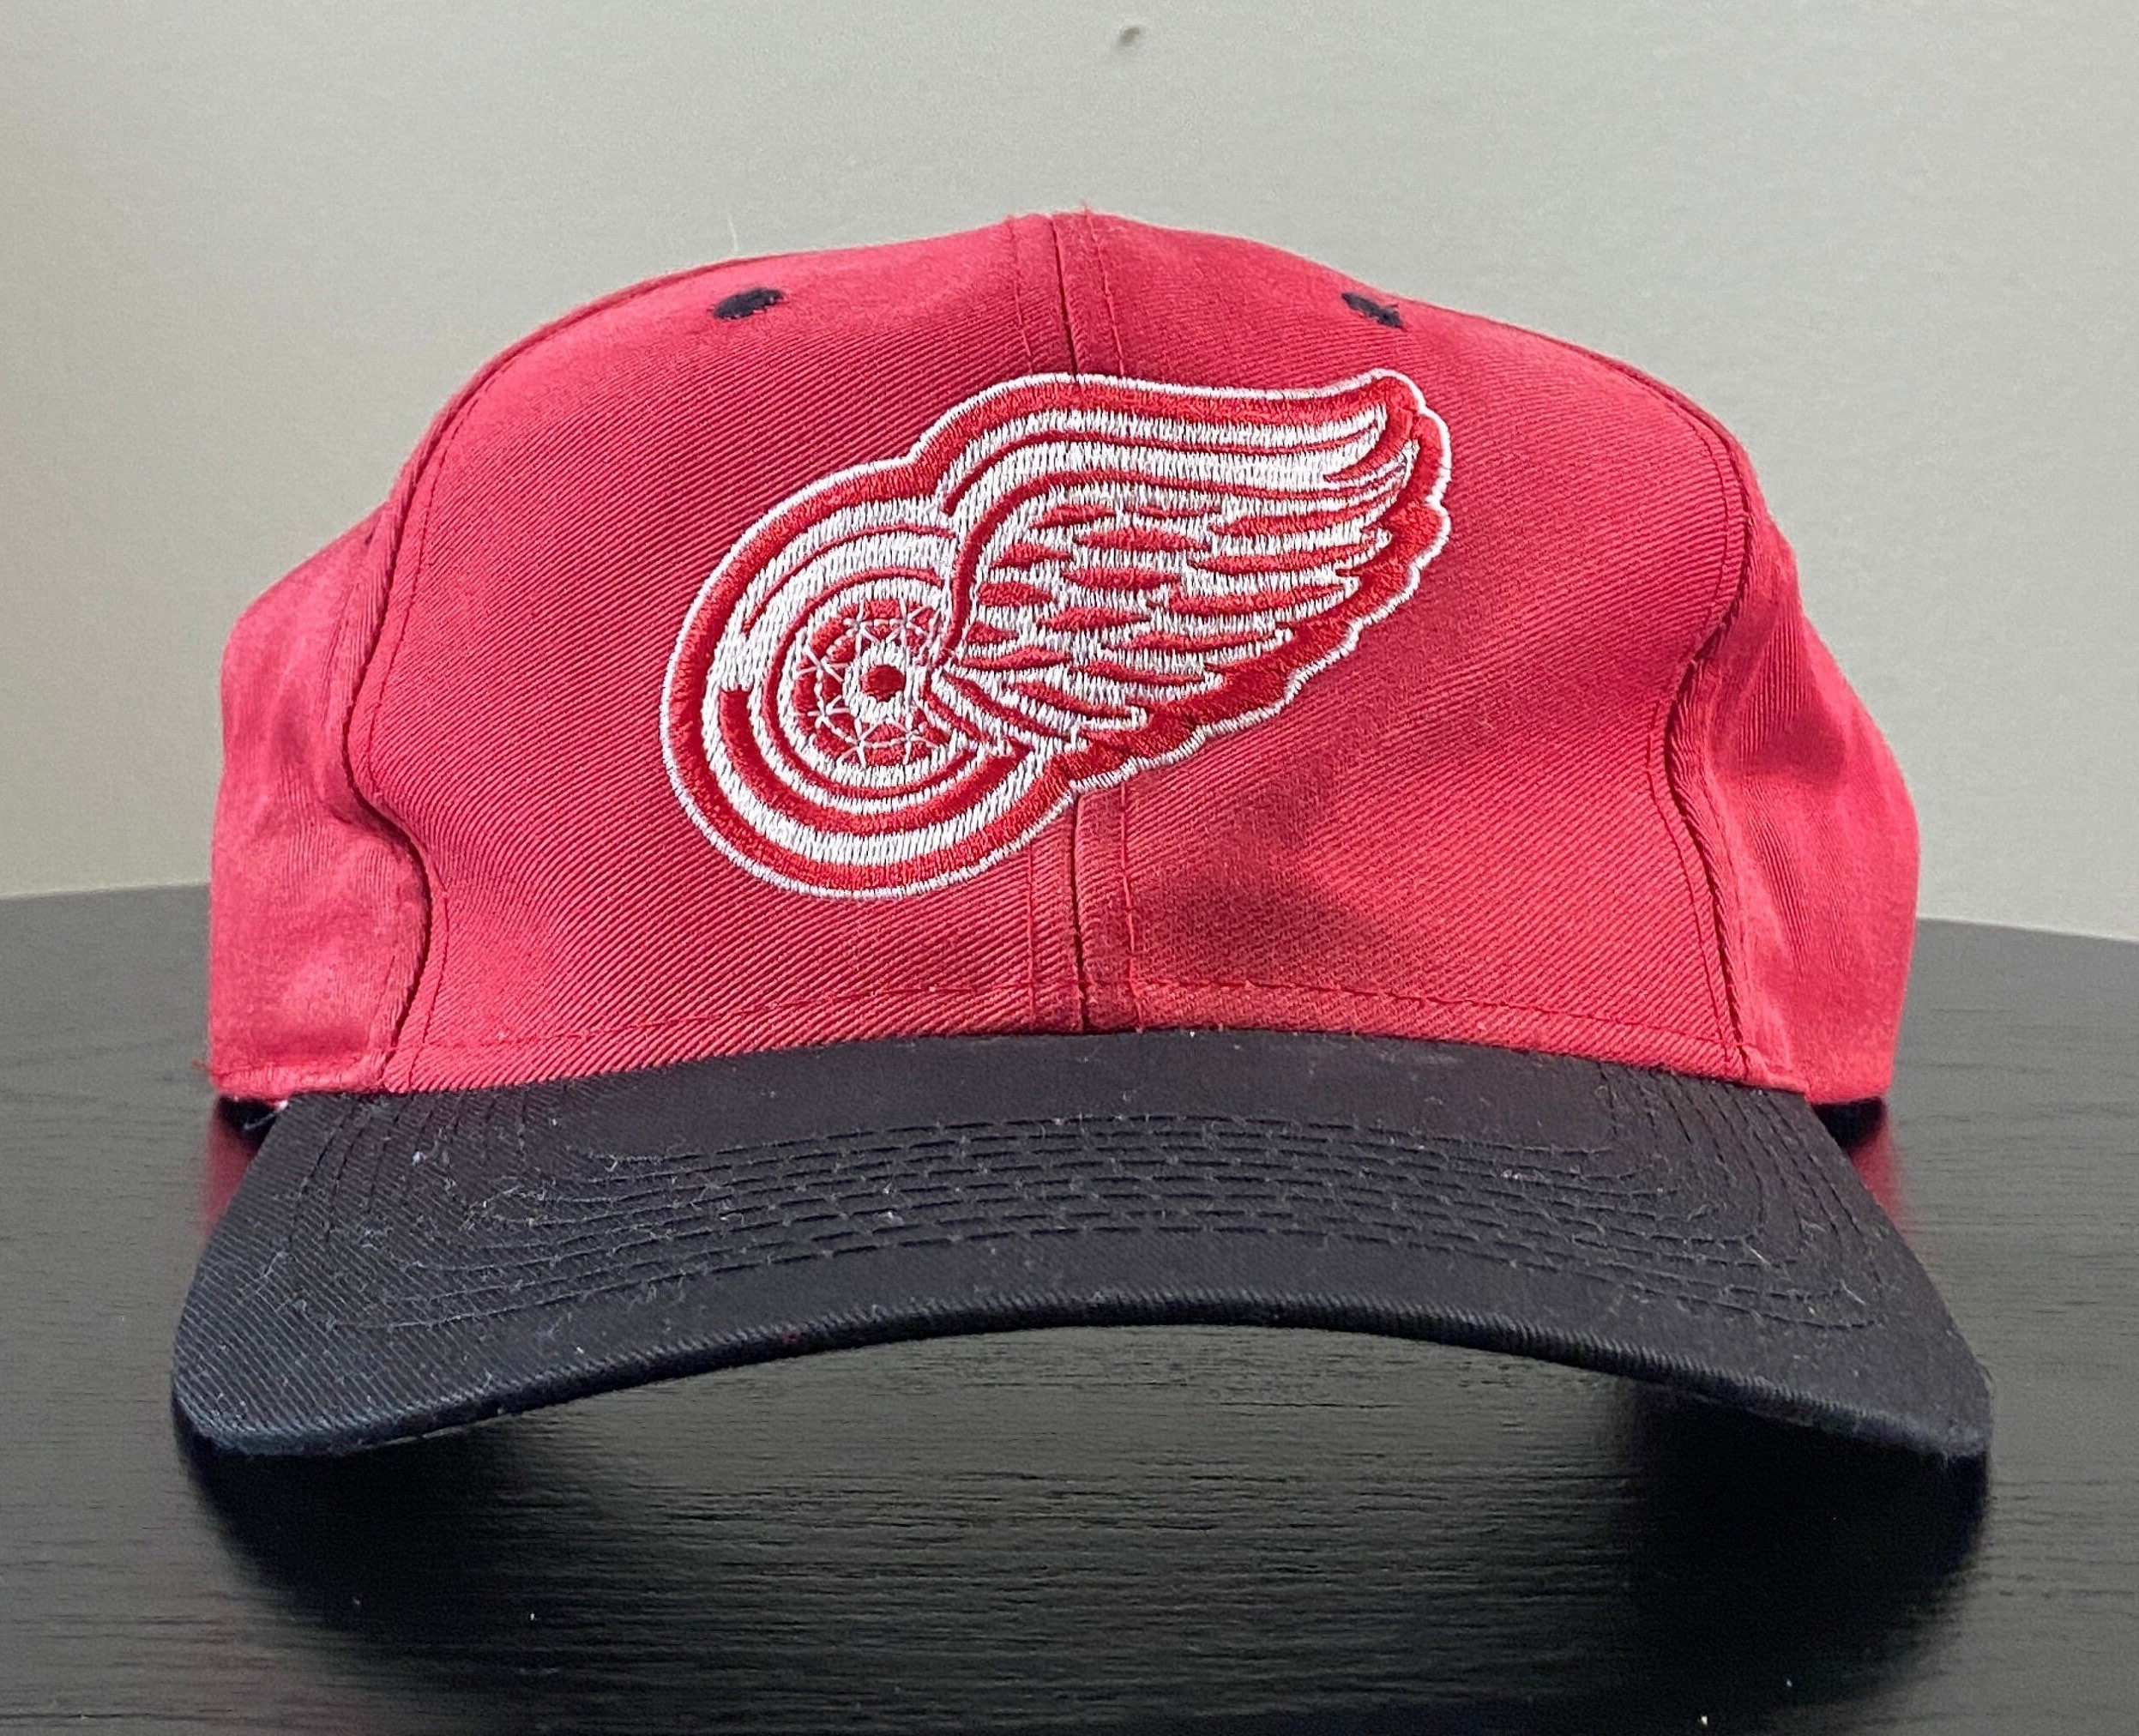 Vintage 1990s NHL Detroit Redwings Stanley Cup Champions Snapback Hat